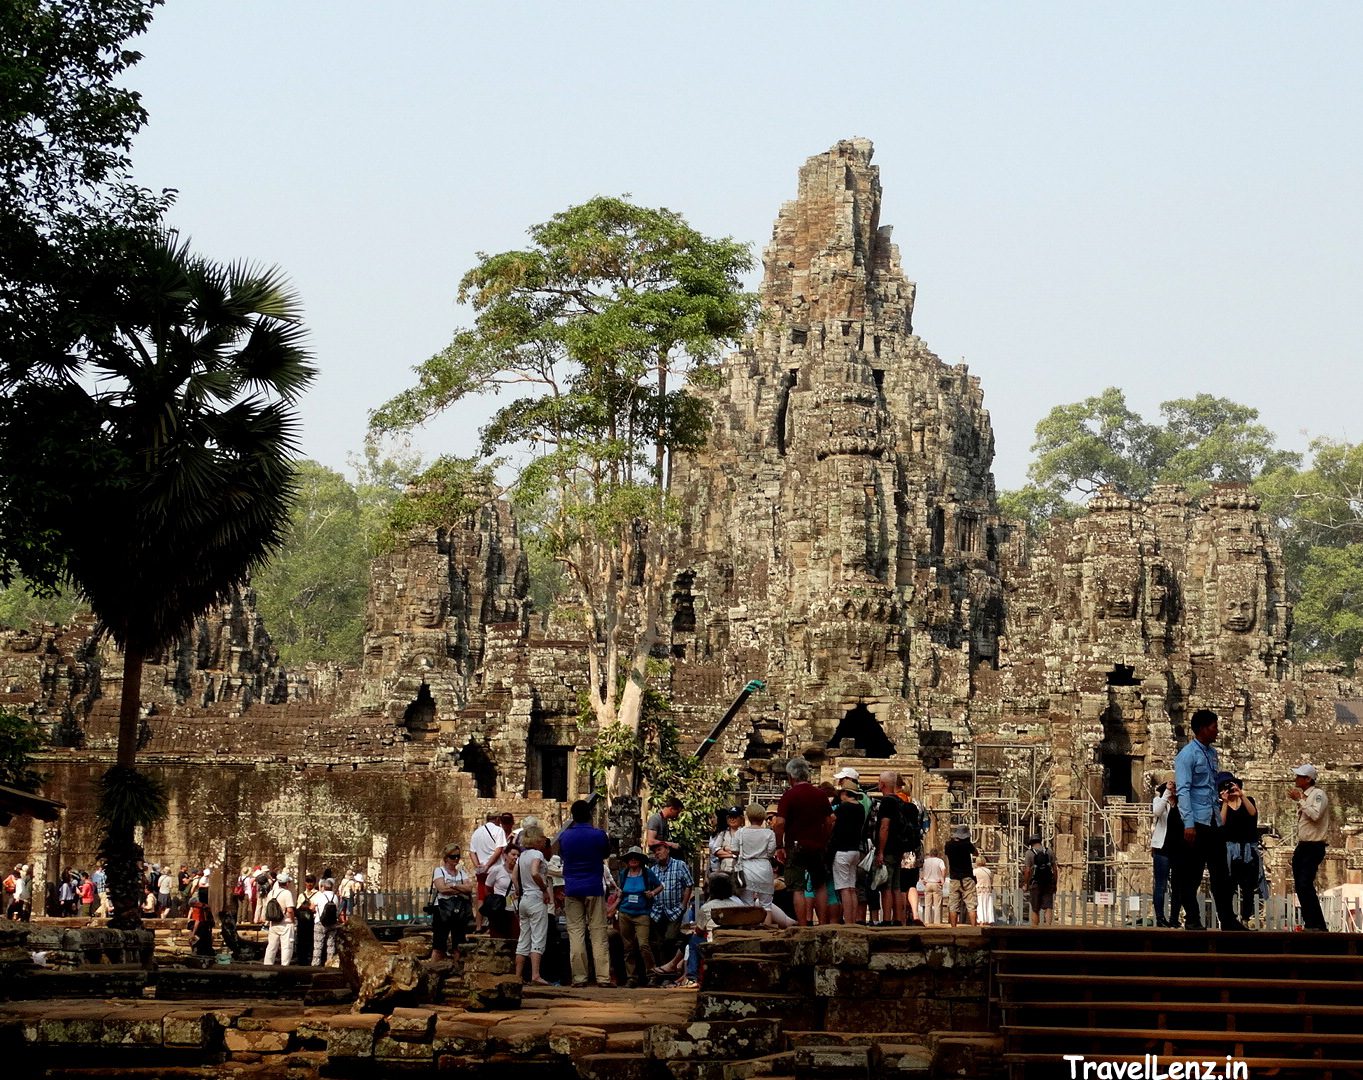 Bayon from a distance